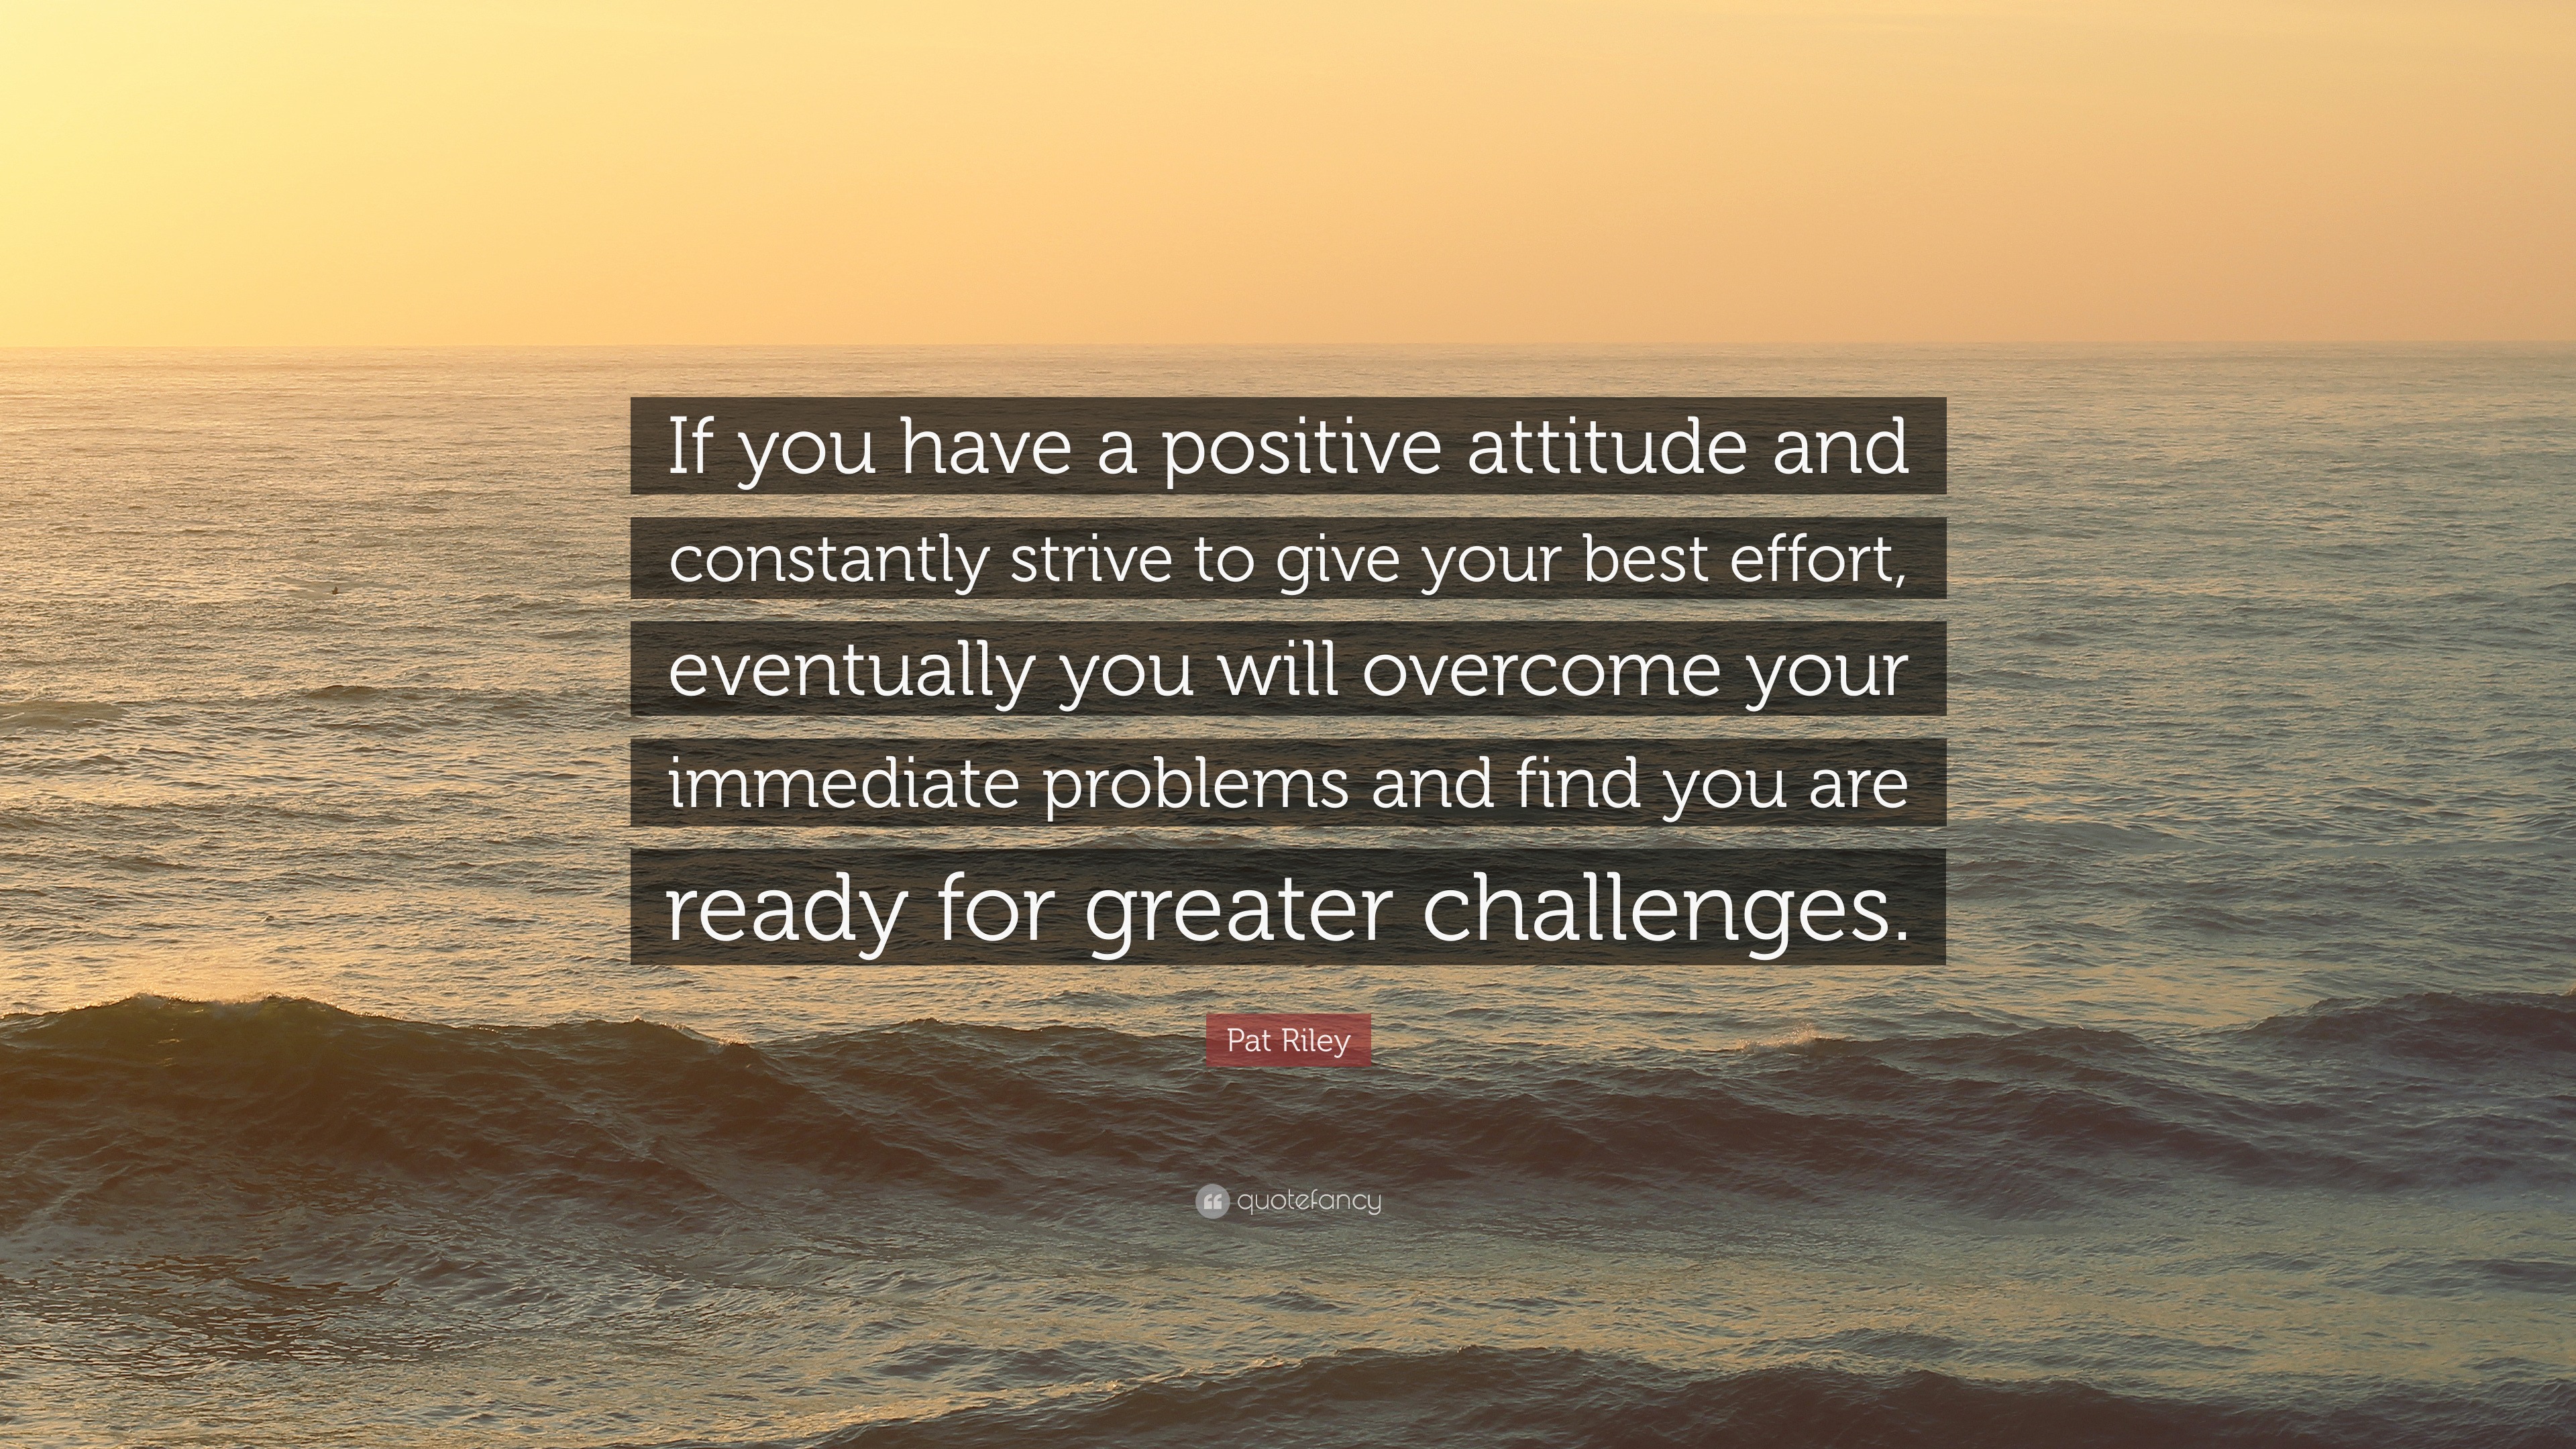 Pat Riley Quote “If you have a positive attitude and